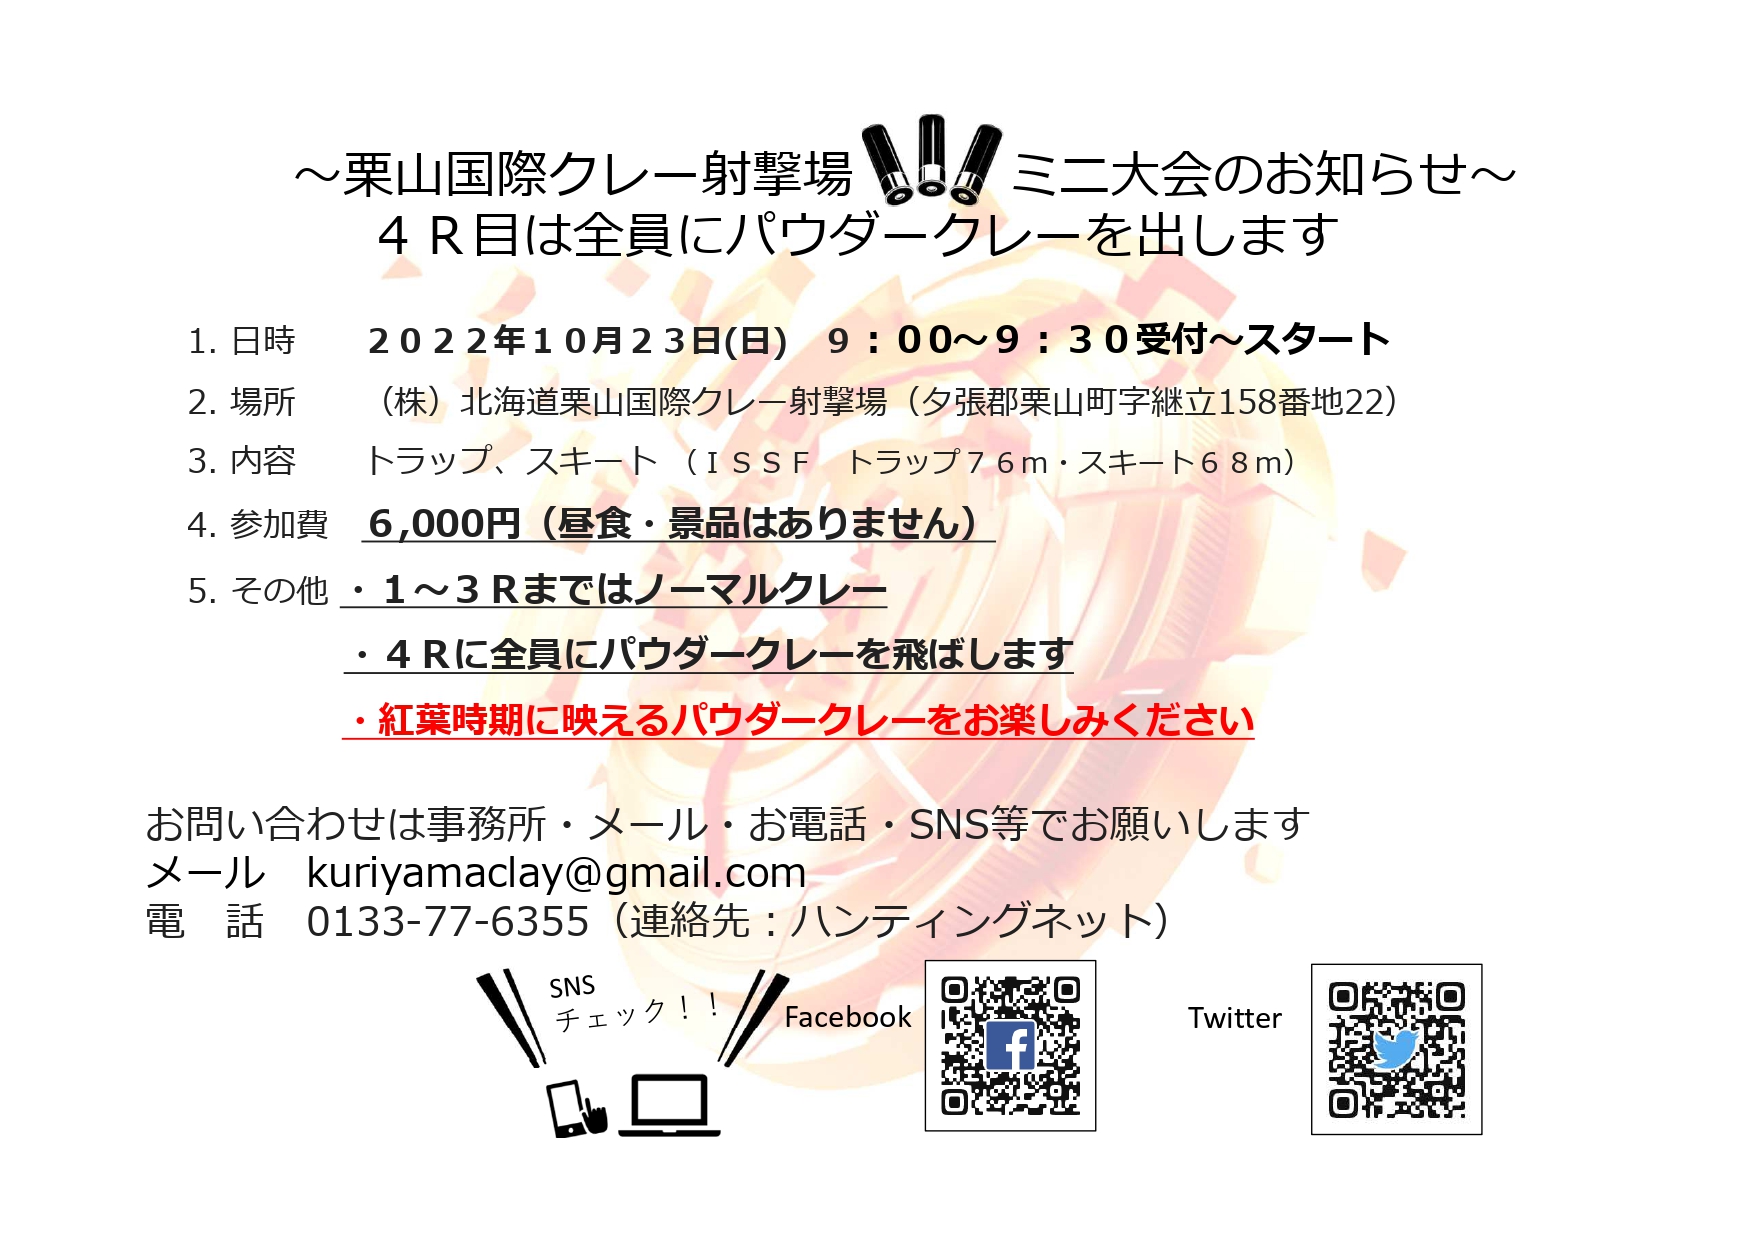 Microsoft PowerPoint - １０２３大会_page-0001 (1)